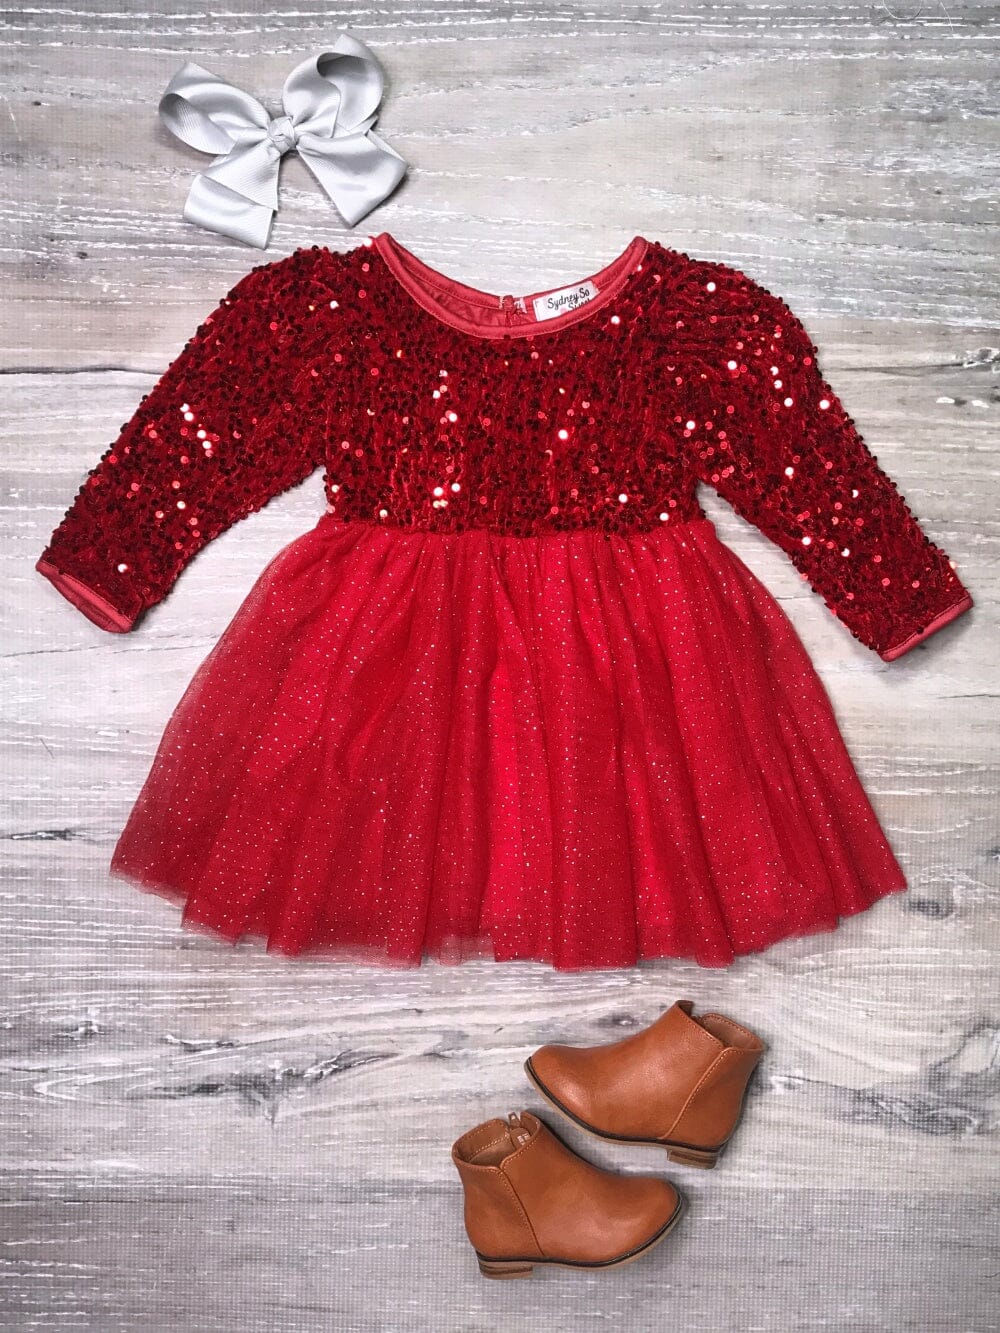 Red Sequin Velvet Tulle Chiffon Girls Special Occasion Christmas Holiday Tutu Dress - Sydney So Sweet